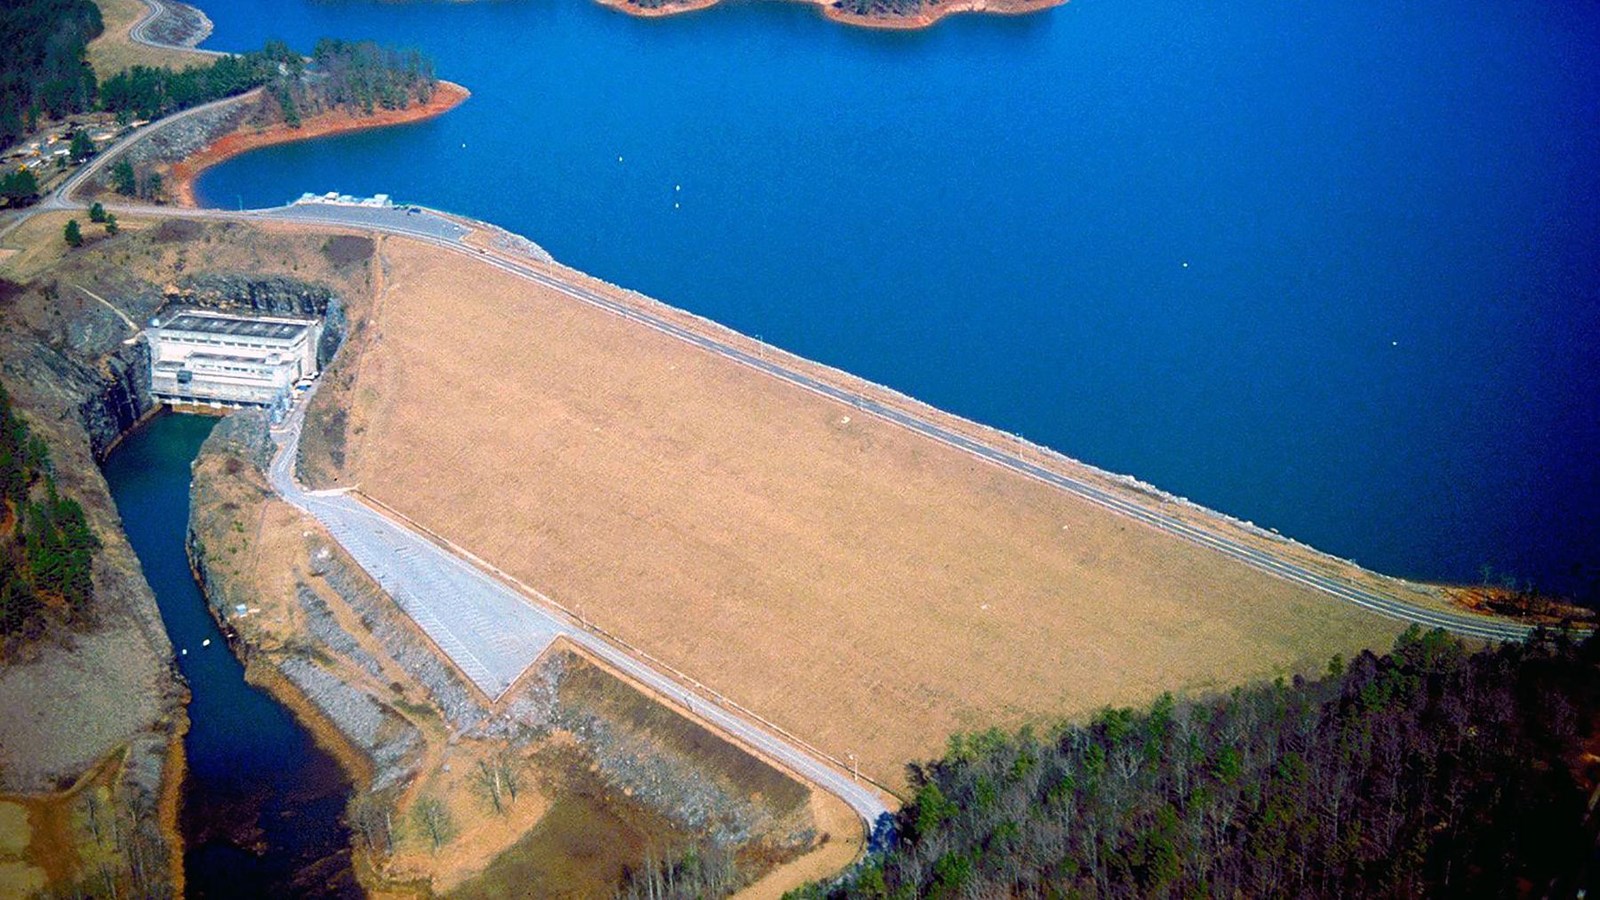 Aerial photo of dam looking at the downstream face of the dam with Lake Lanier in background